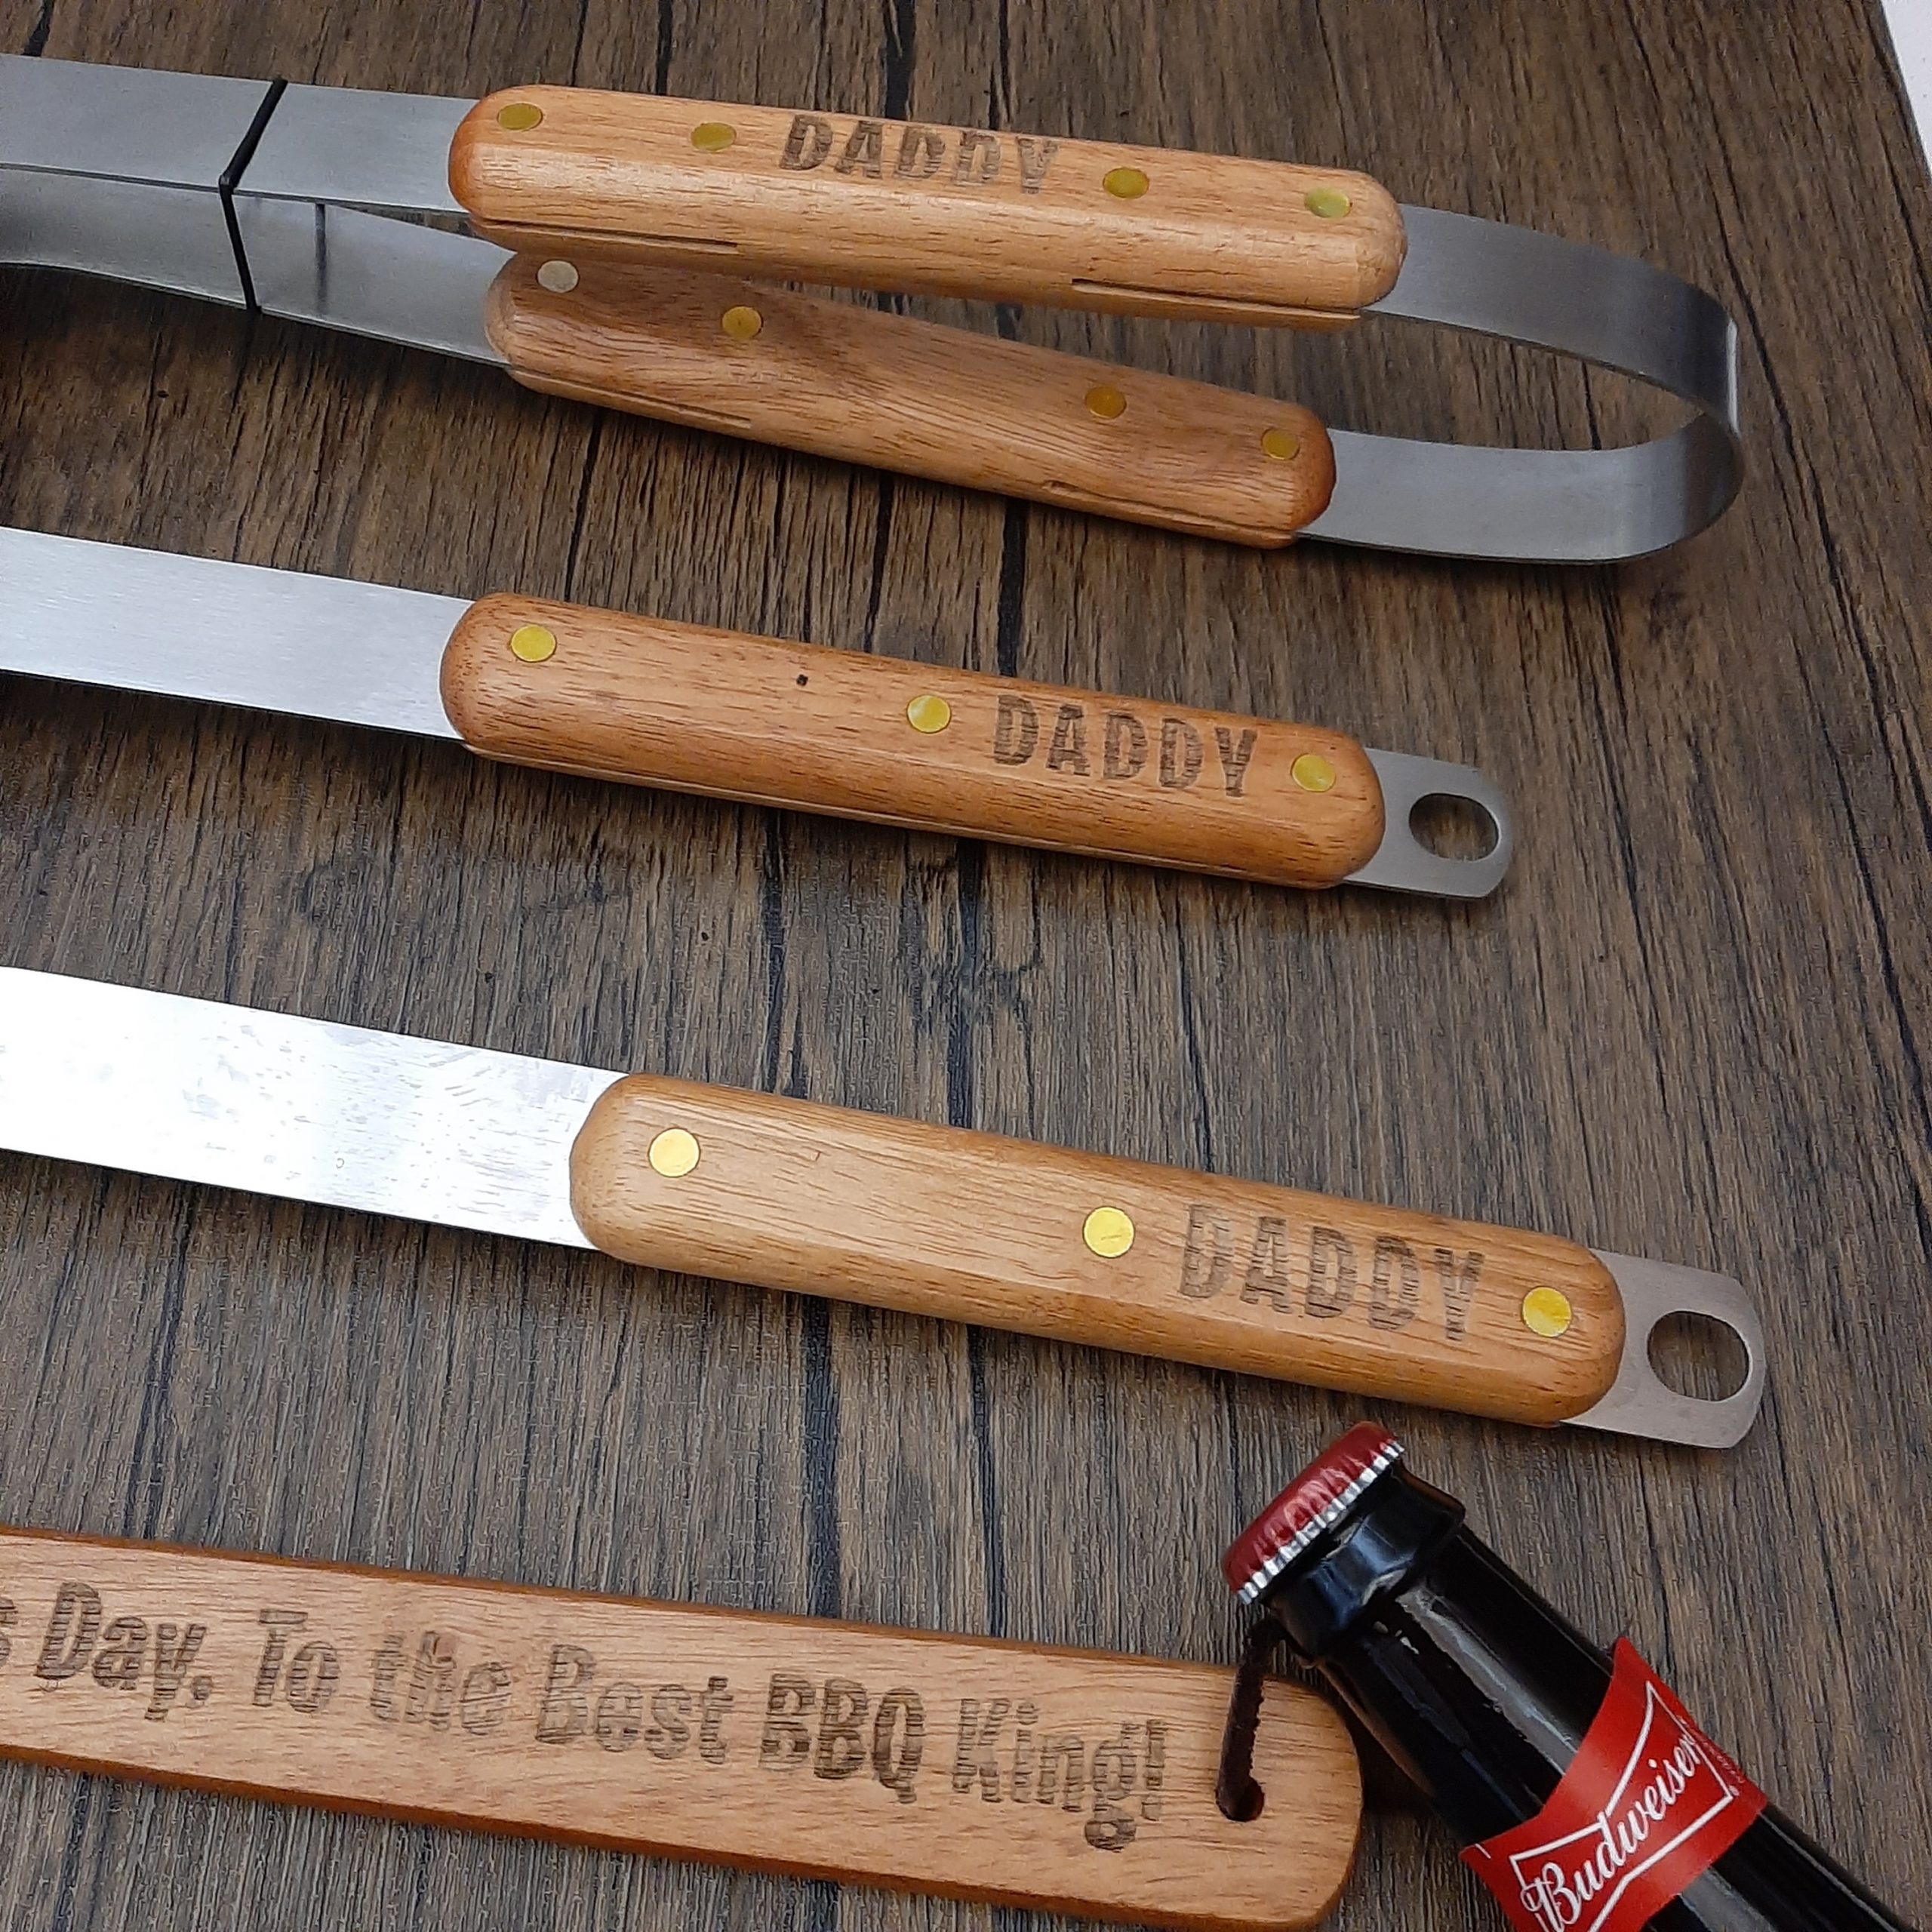 bbq utensil tool kit with wrapped carrier with personalised handles zoomed in on engraving